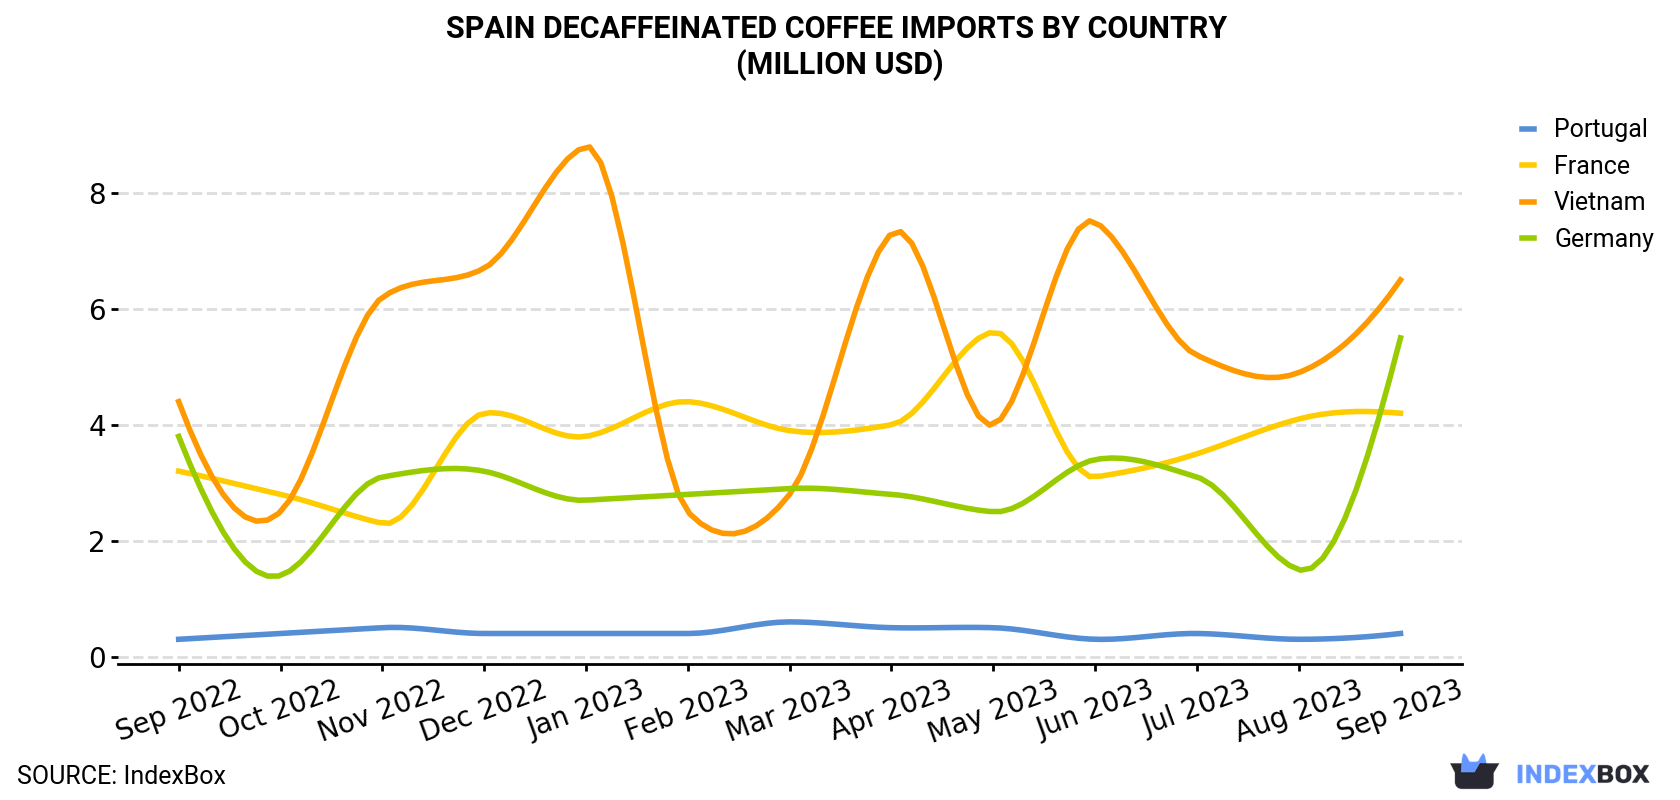 Spain Decaffeinated Coffee Imports By Country (Million USD)